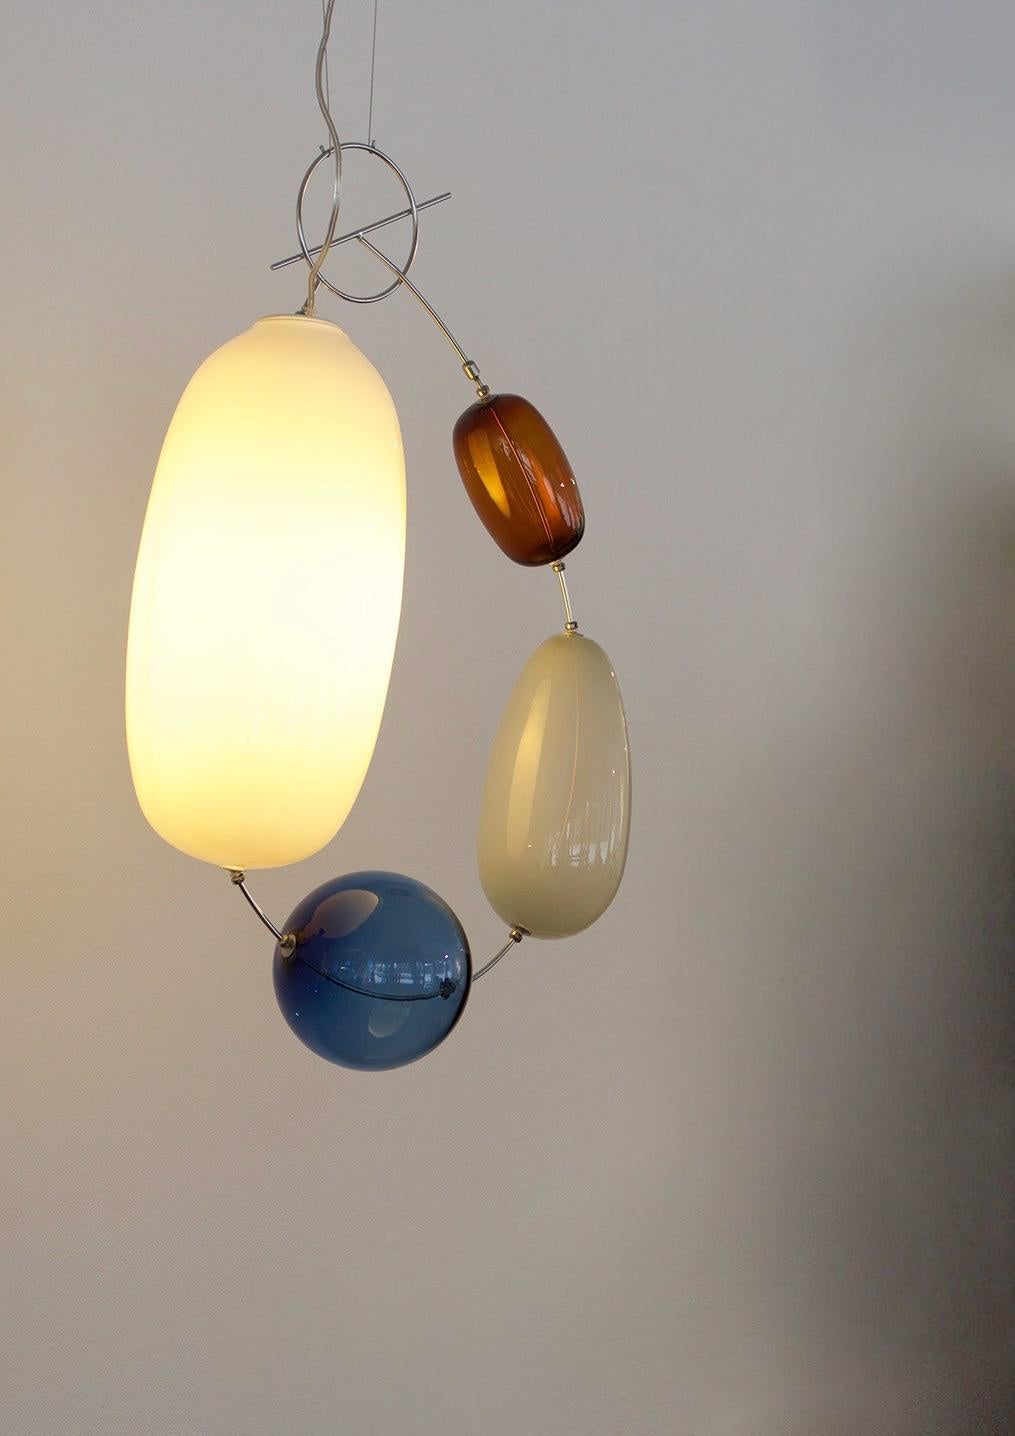 Exceptional pendant made out of mouth blown glass and stainless steel. A quality contemporary design named 'Hely' by Finnish designer Katriina Nuutinen.
The design was originally designed in 2009 and is made in a limited edition of only 200 pieces